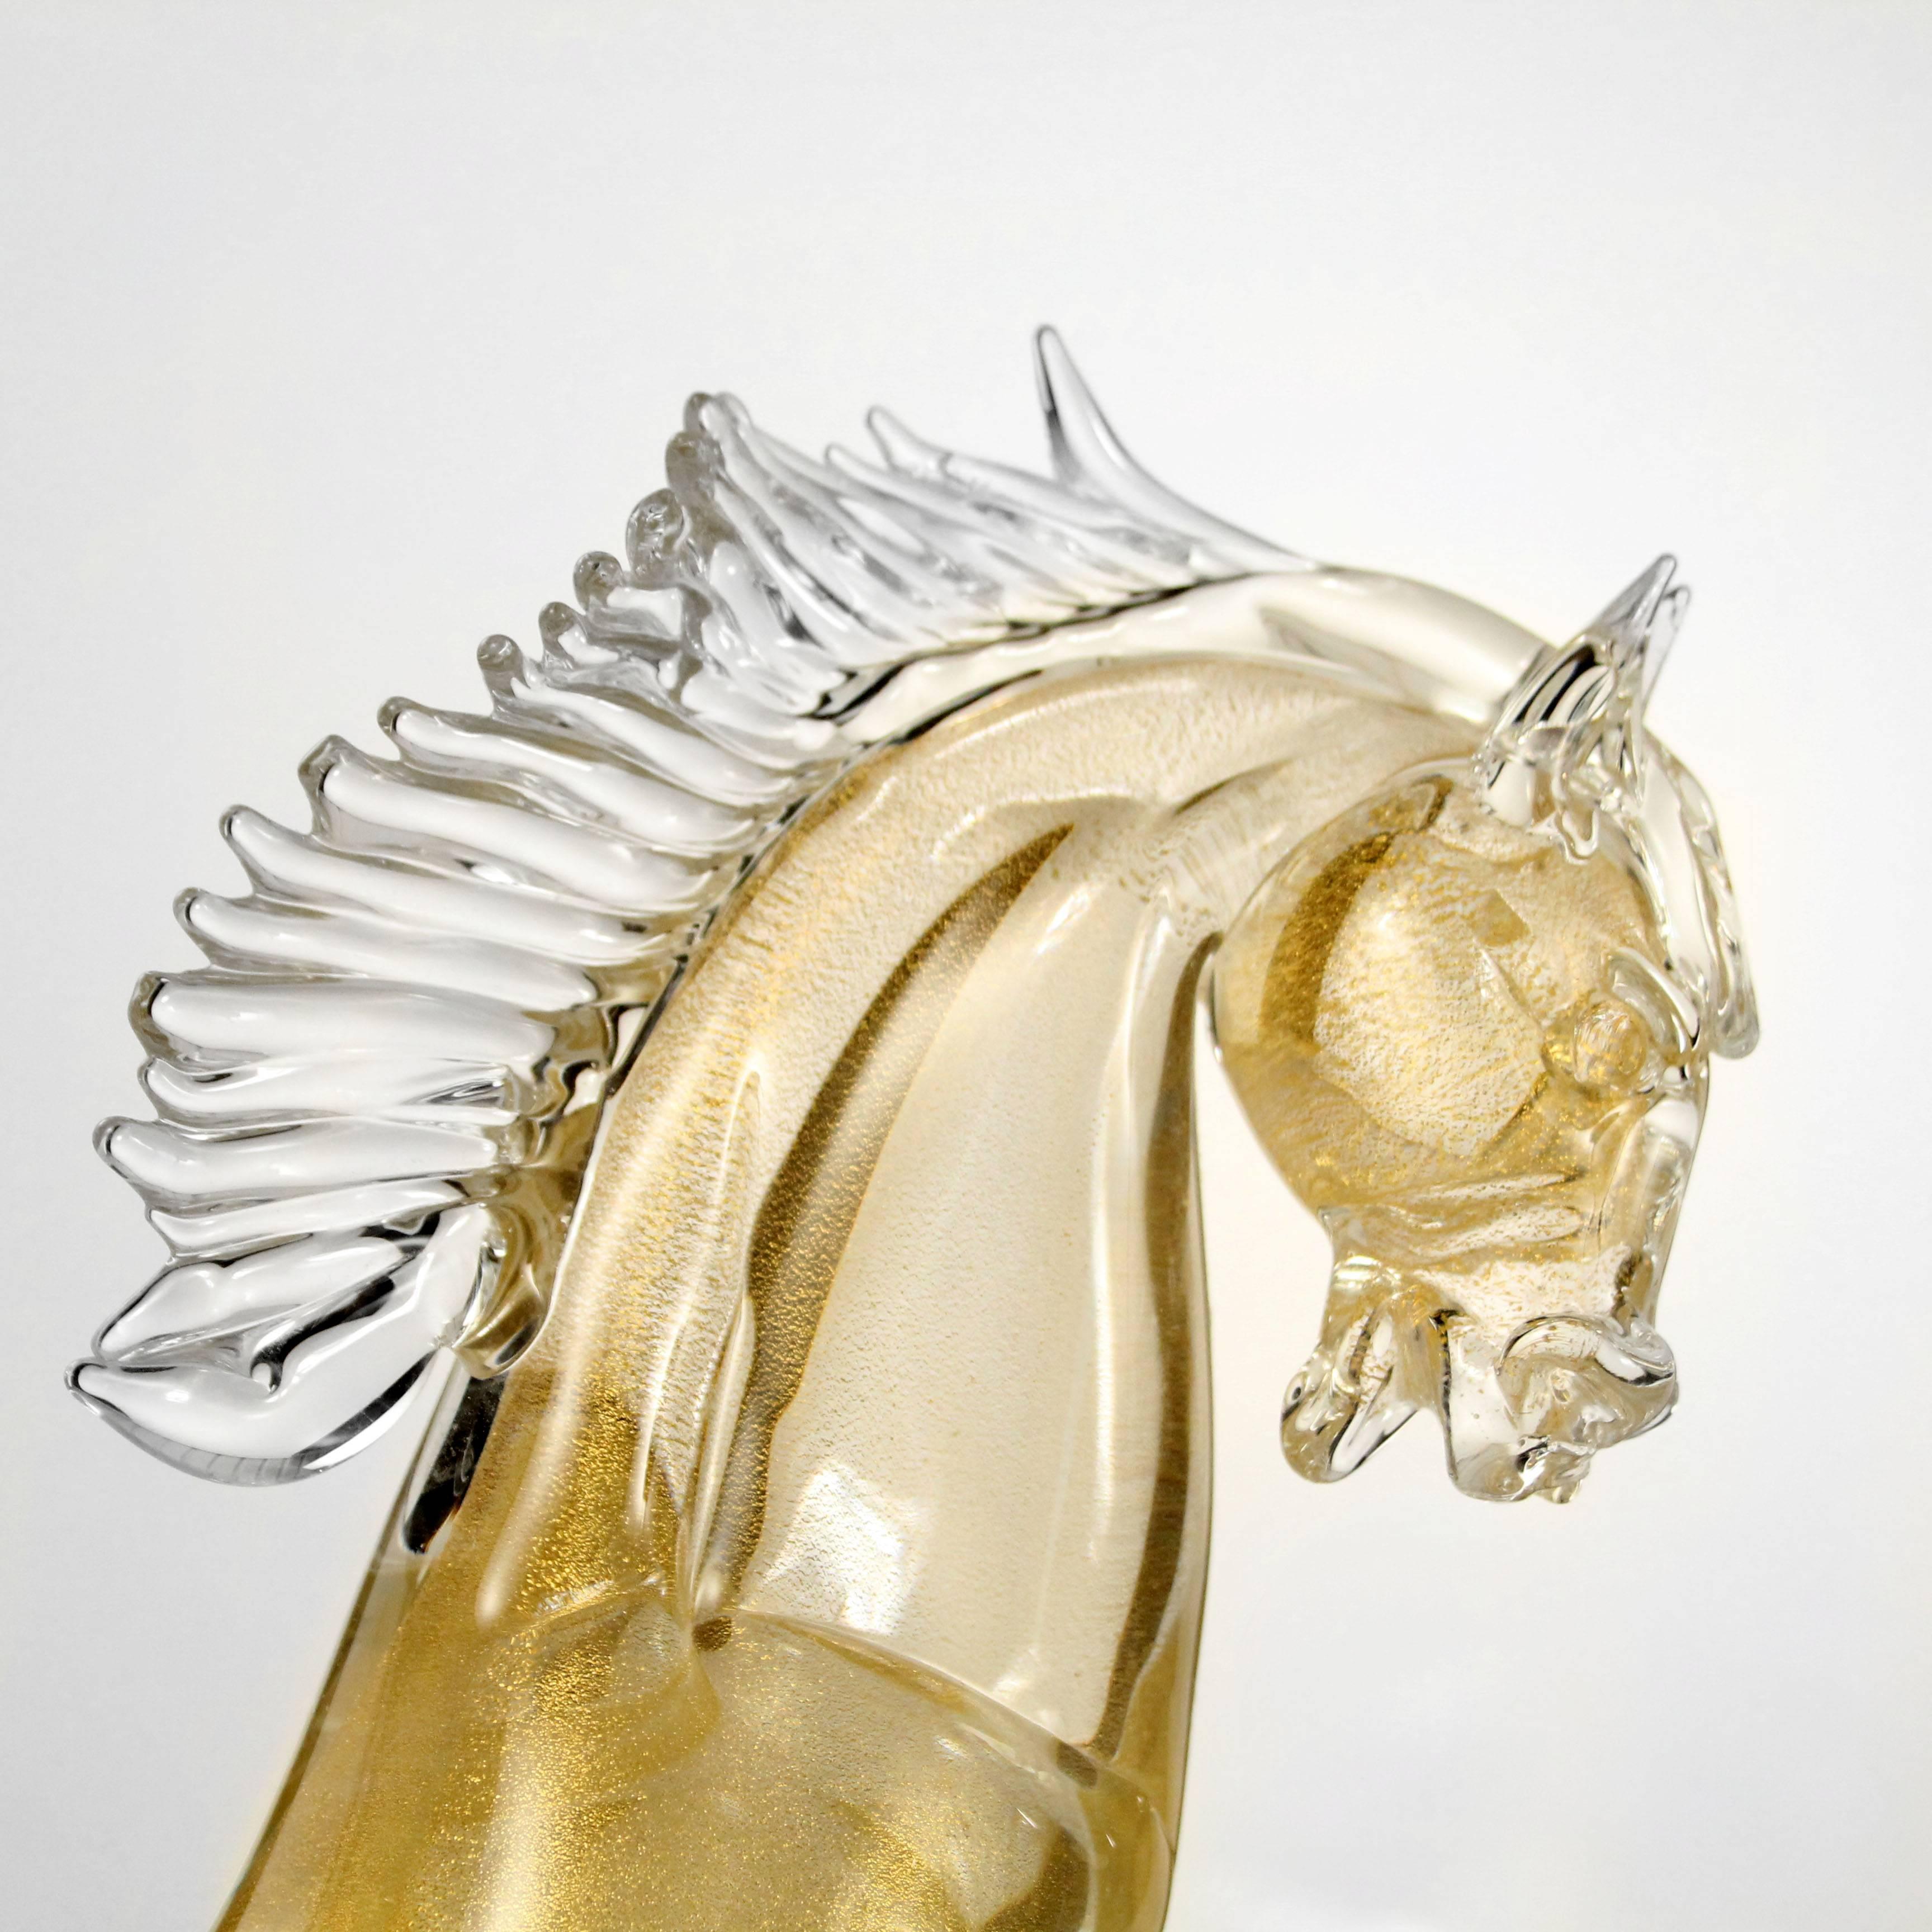 Murano glass handmade horse, transparent and completely gold leaf 24-karat.
Brand new, in excellent condition.
Made in Italy, on Murano island.